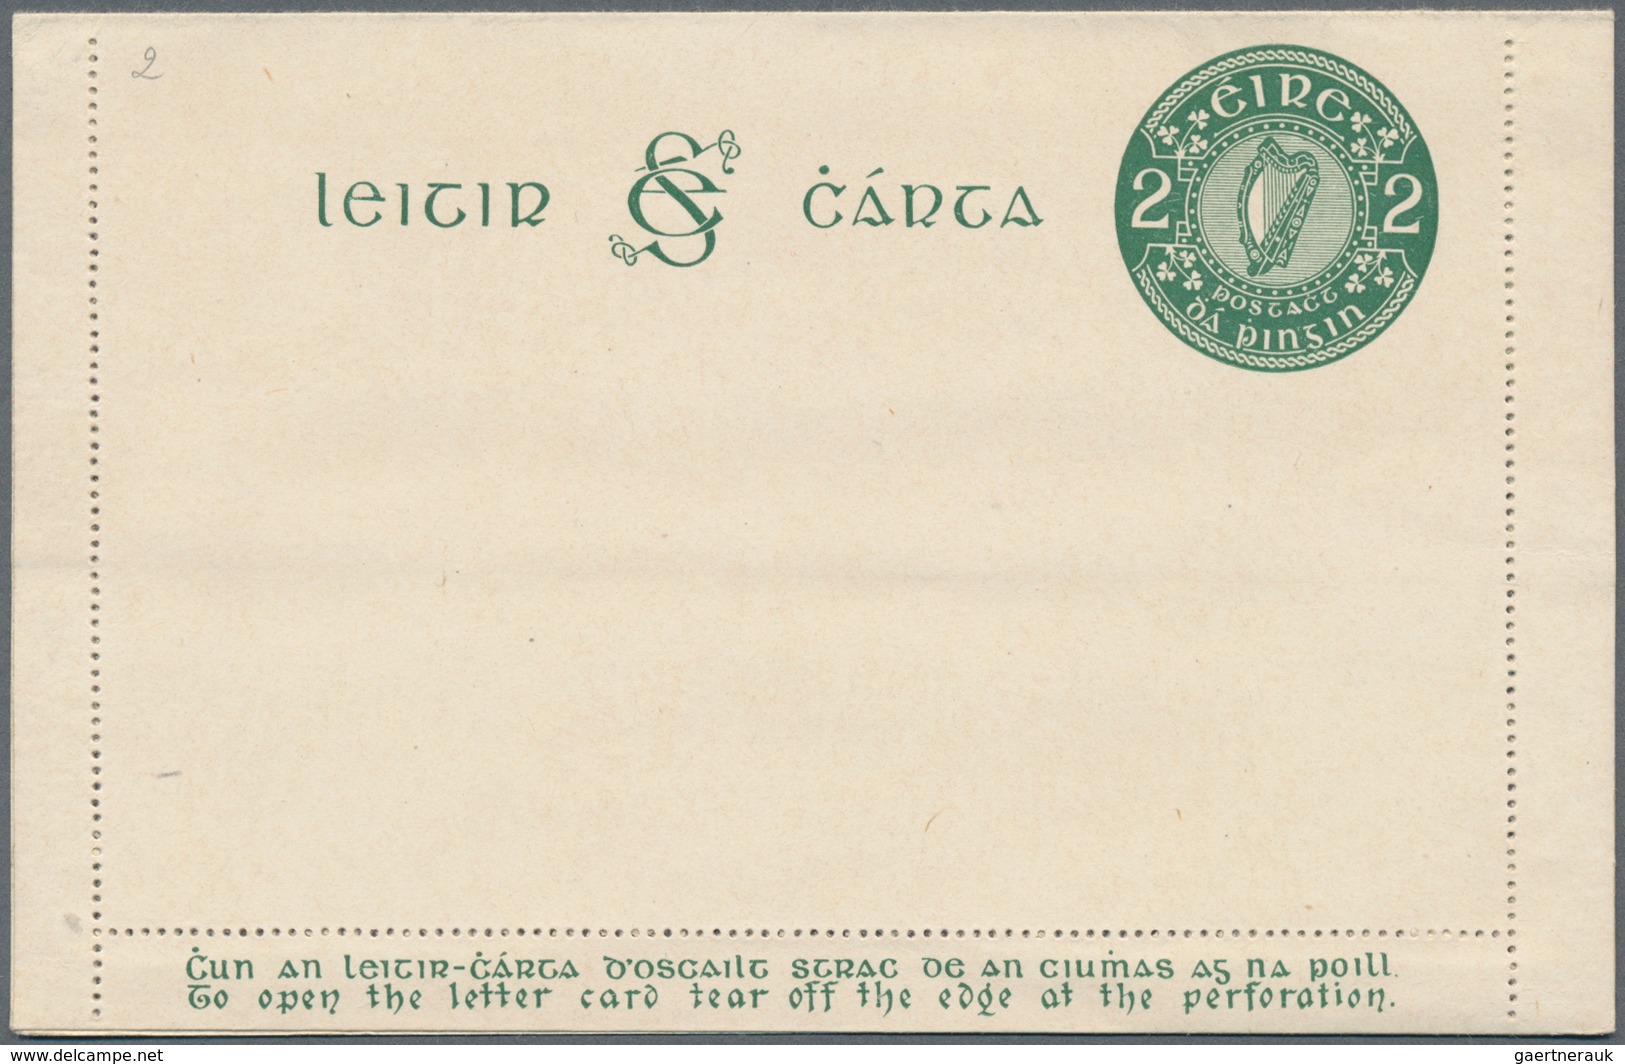 Irland - Ganzsachen: 1924, 2 Pg. Letter Card Unused With Wrapper For 10 Letter Cards 2/-. Very Scarc - Postal Stationery